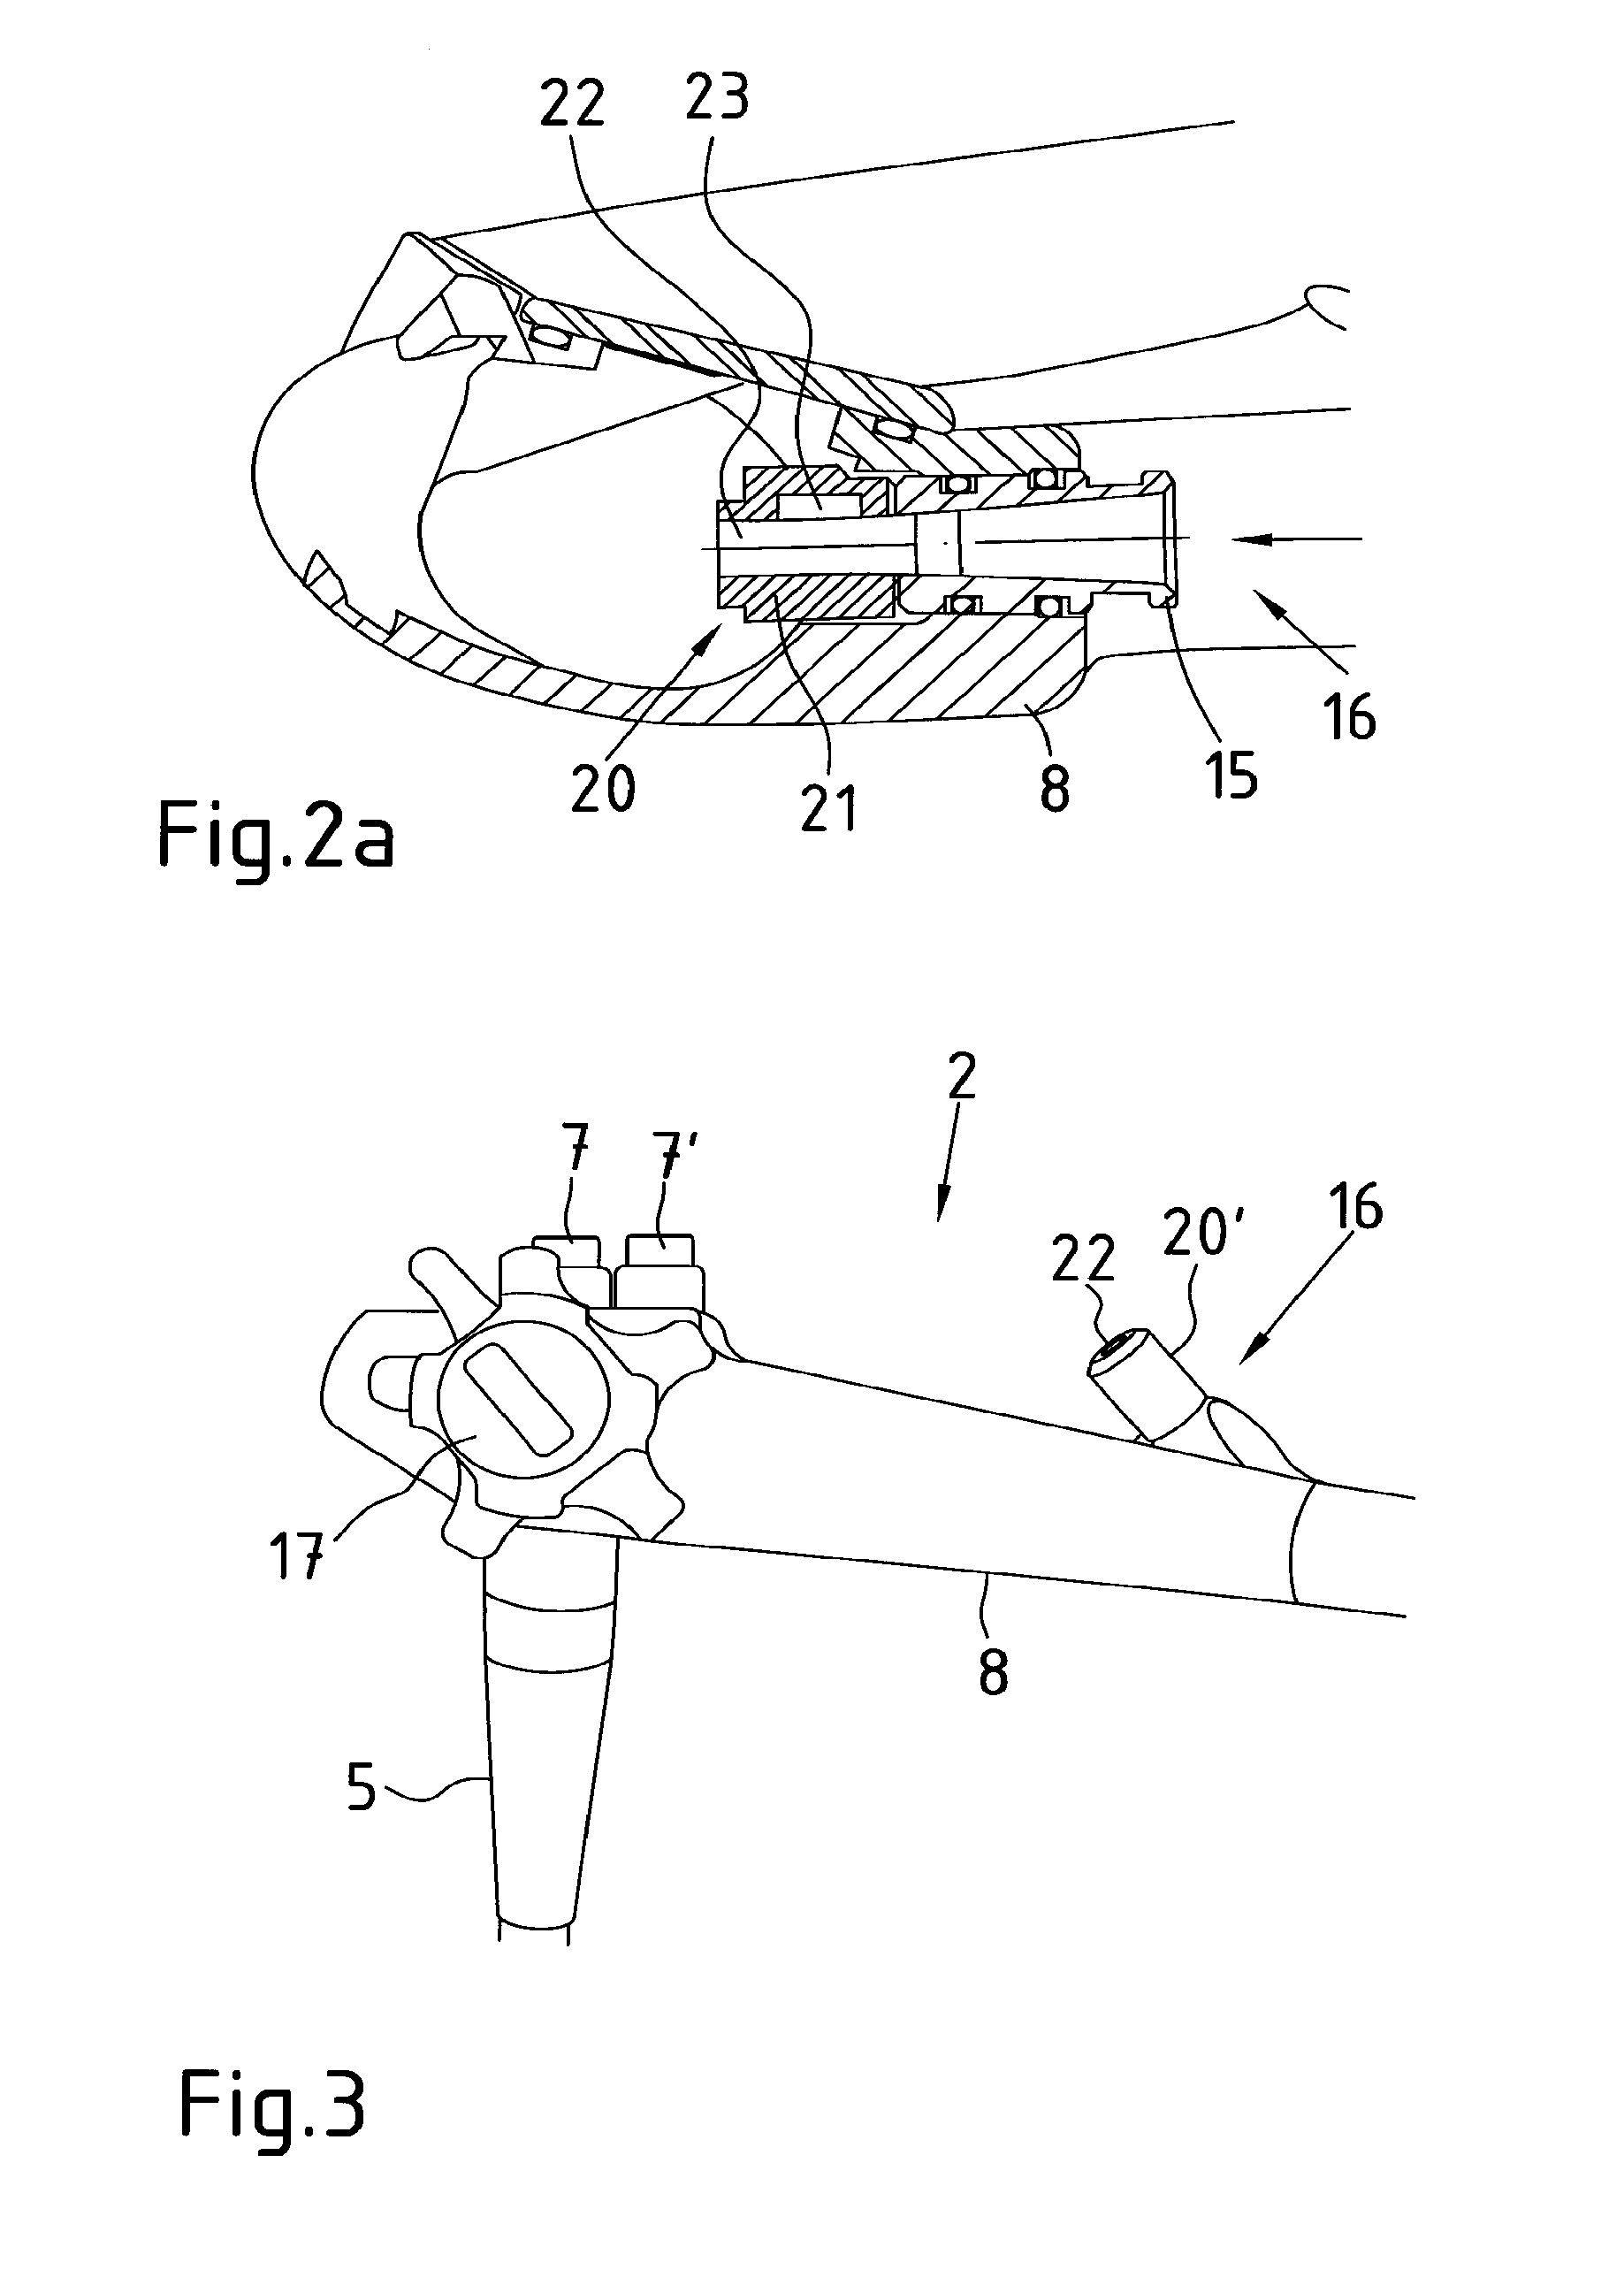 Simulation system for training in endoscopic operations